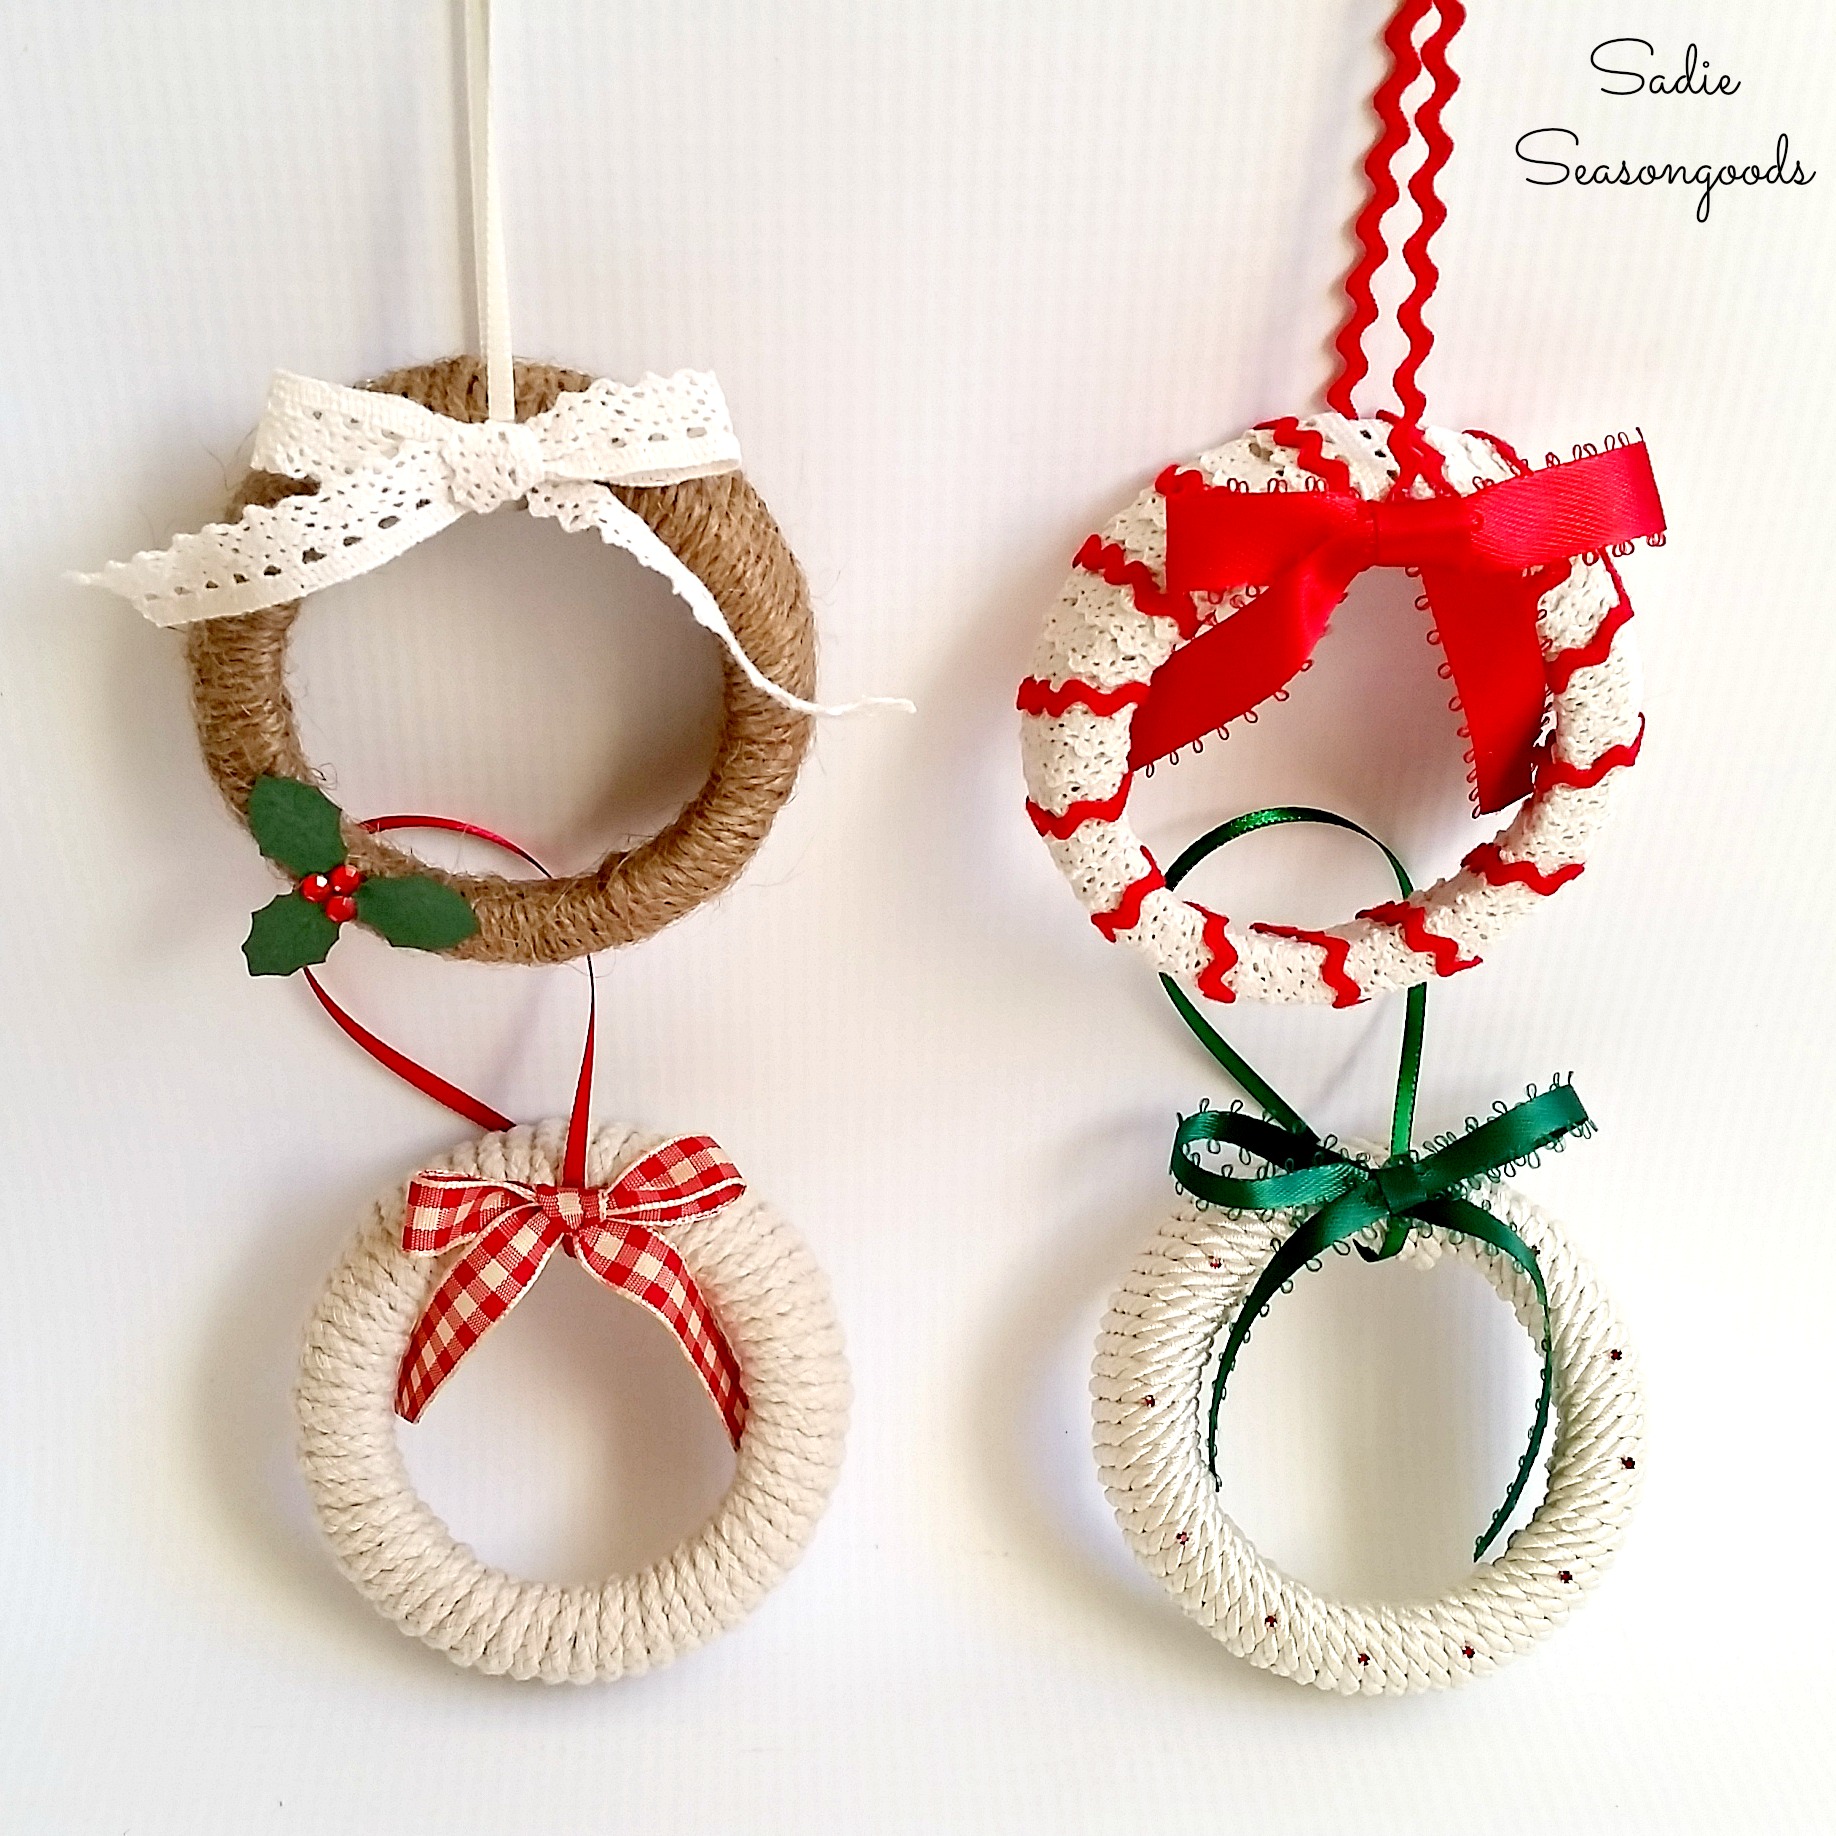 Simple mason jar Christmas decorations. Quick, easy, and inexpensive!